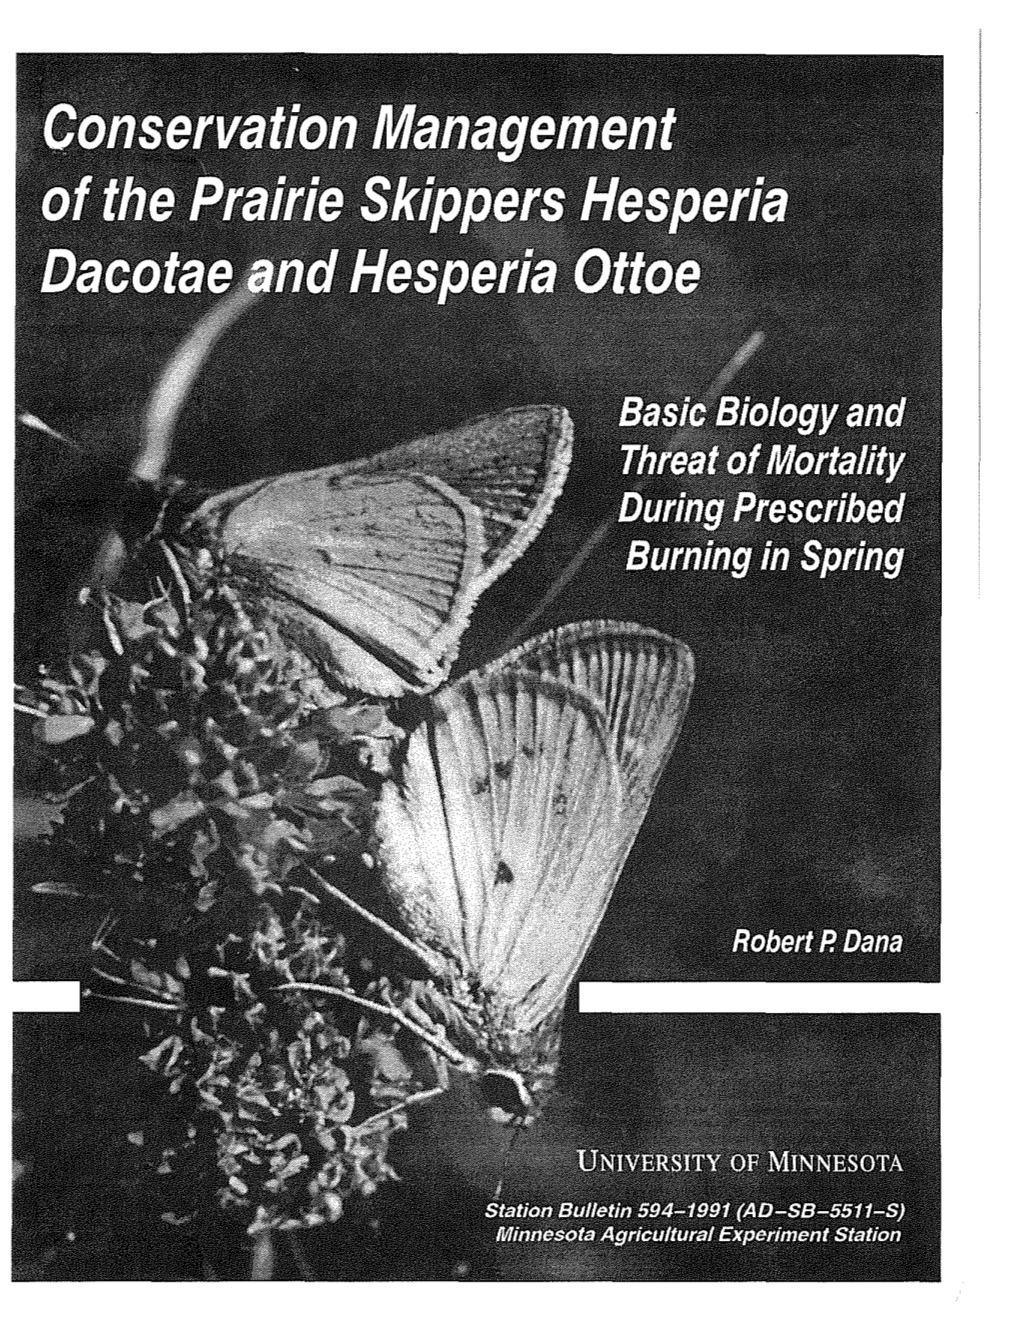 Hesperia Ottoe Basic Biology and Threat of Mortality During Prescribed Burning in Spring